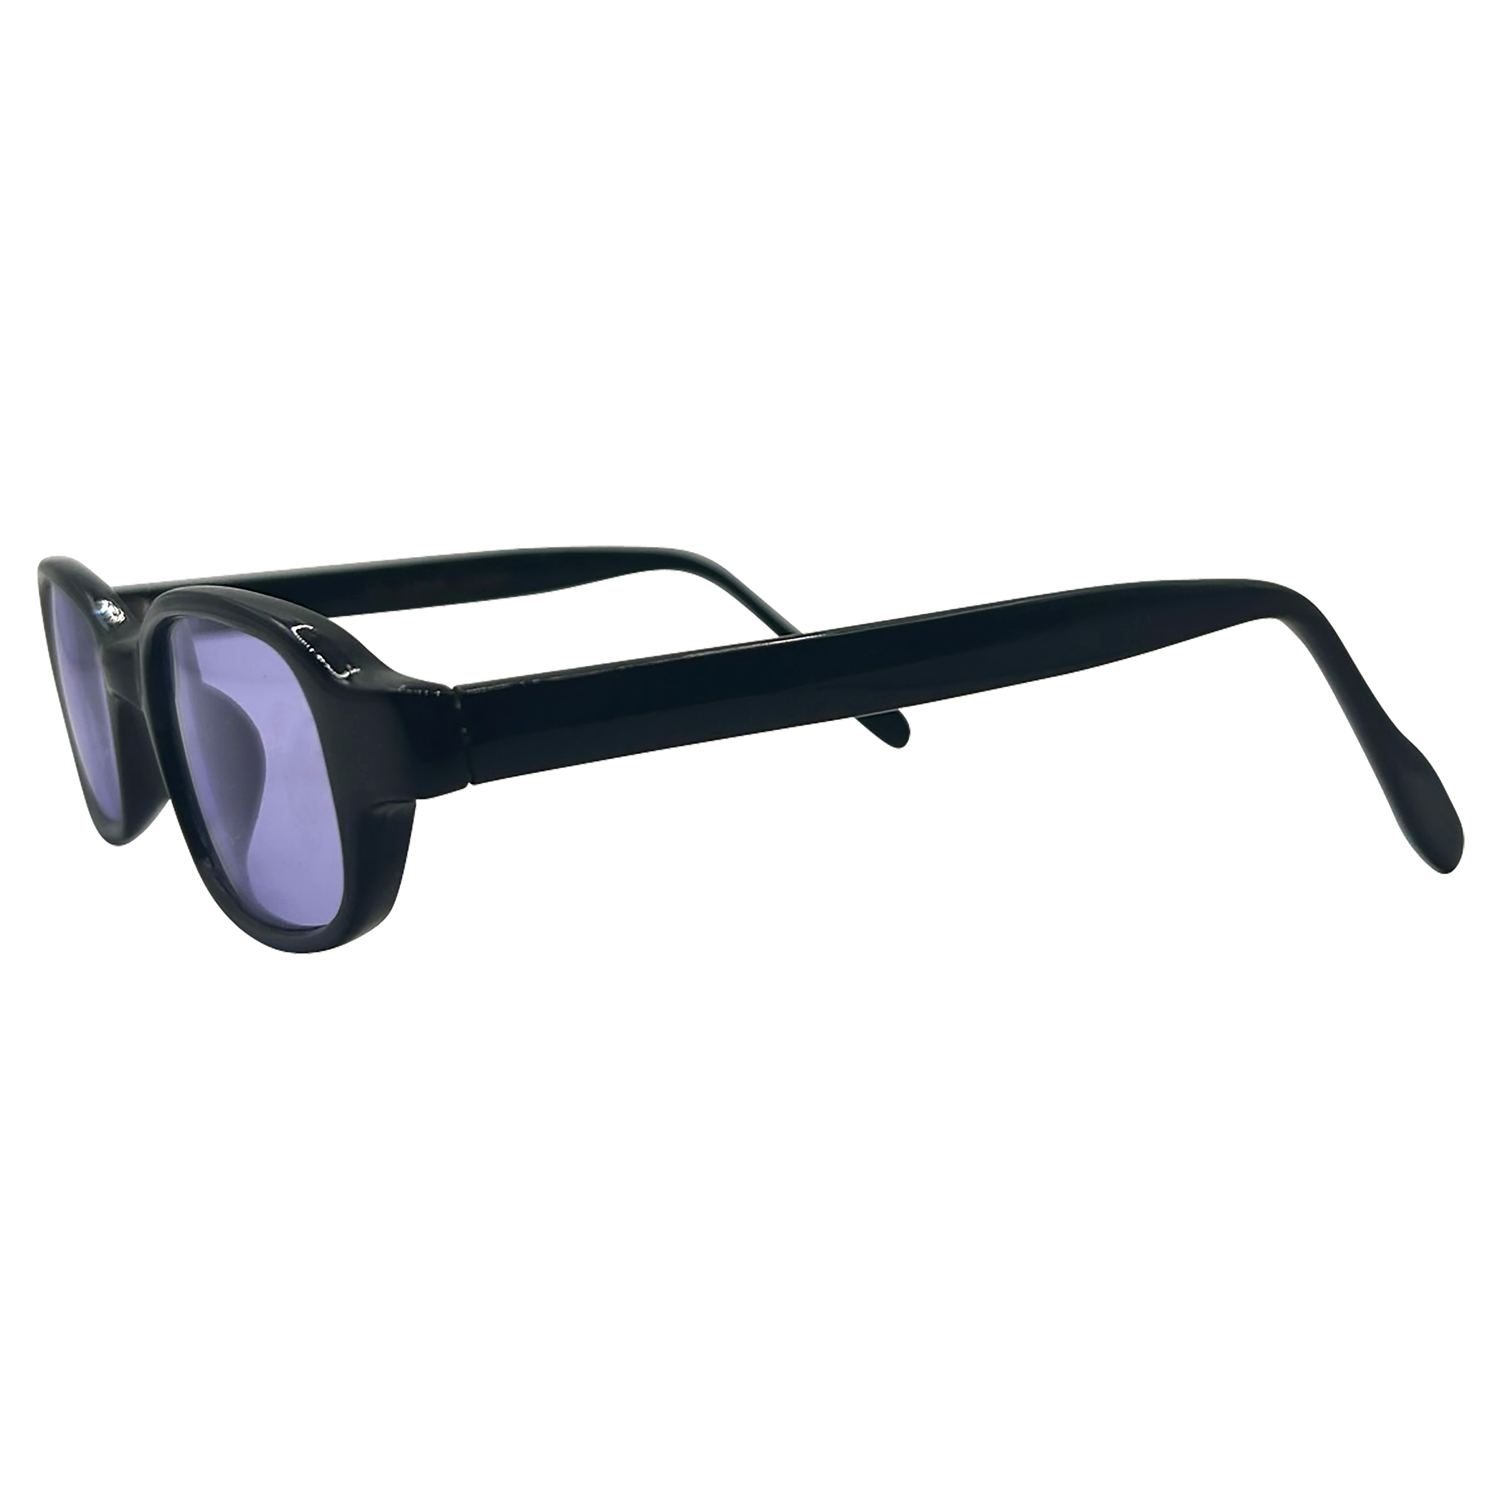 ANTELOPE Color Tinted Hippie Slim 90s Sunglasses *As Seen On: Millie Bobby Brown*